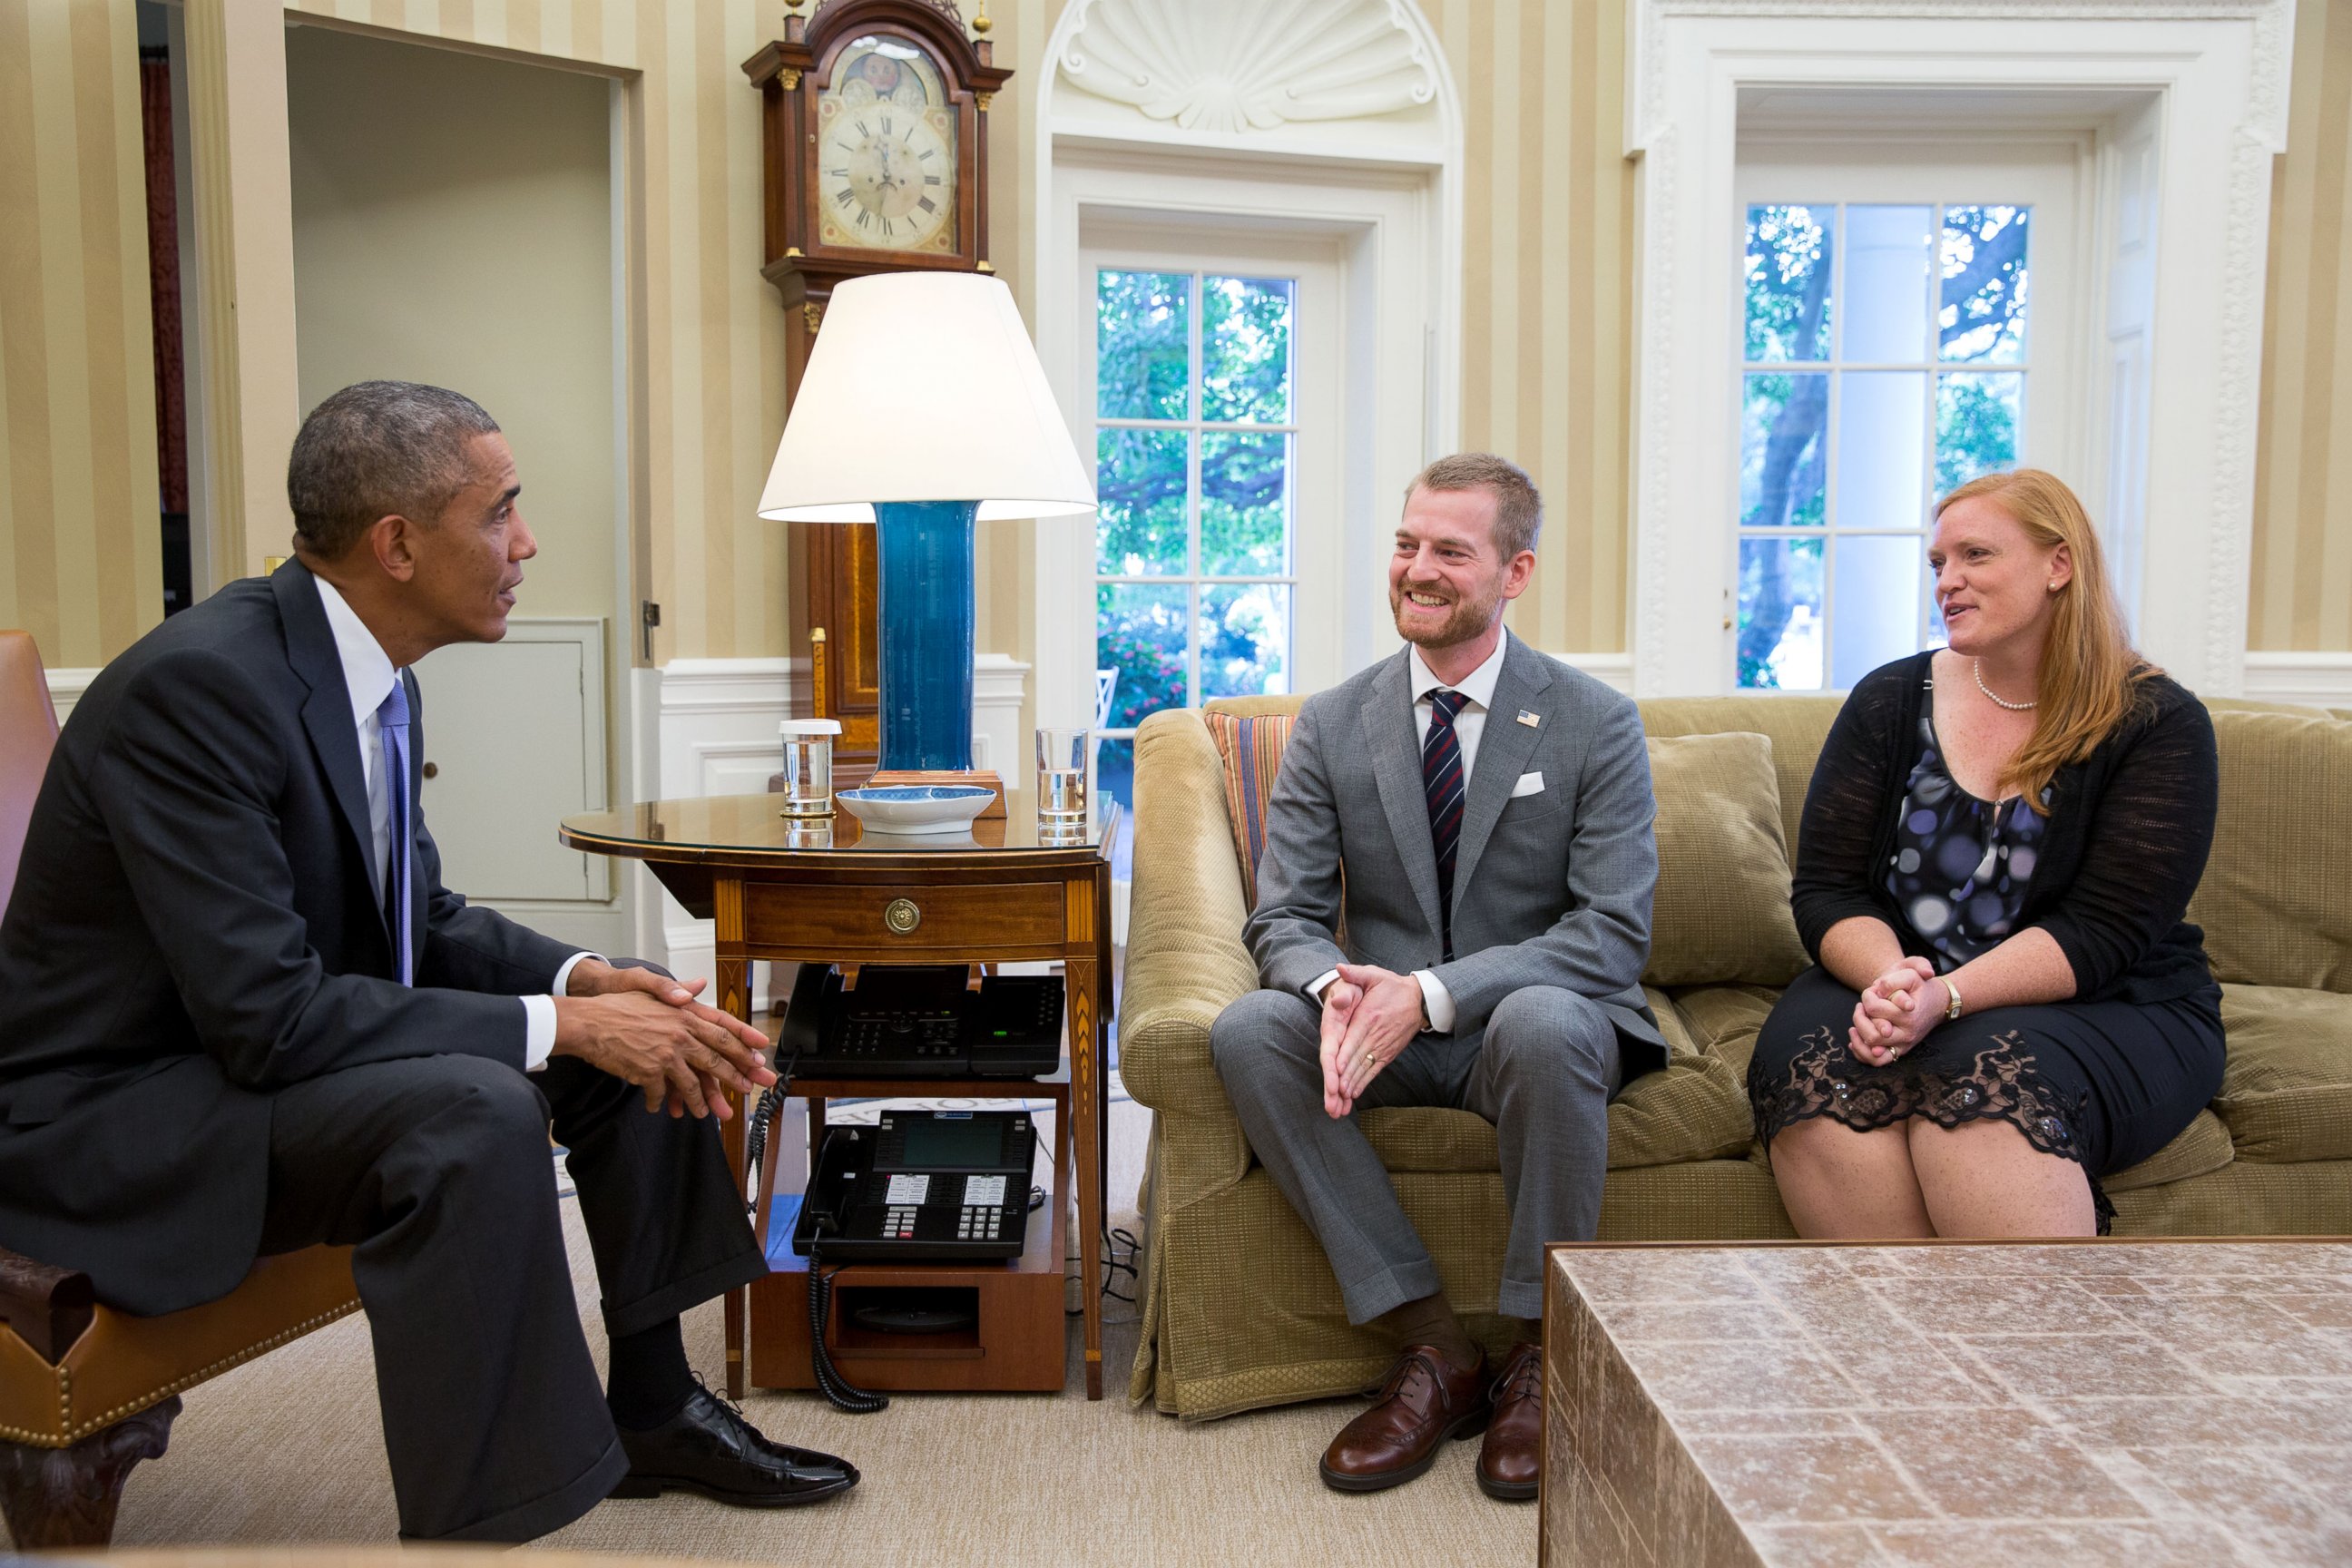 PHOTO: President Barack Obama meets with Dr. Kent Brantly and his wife, Amber, during an Oval Office drop by on Sept. 16, 2014.  